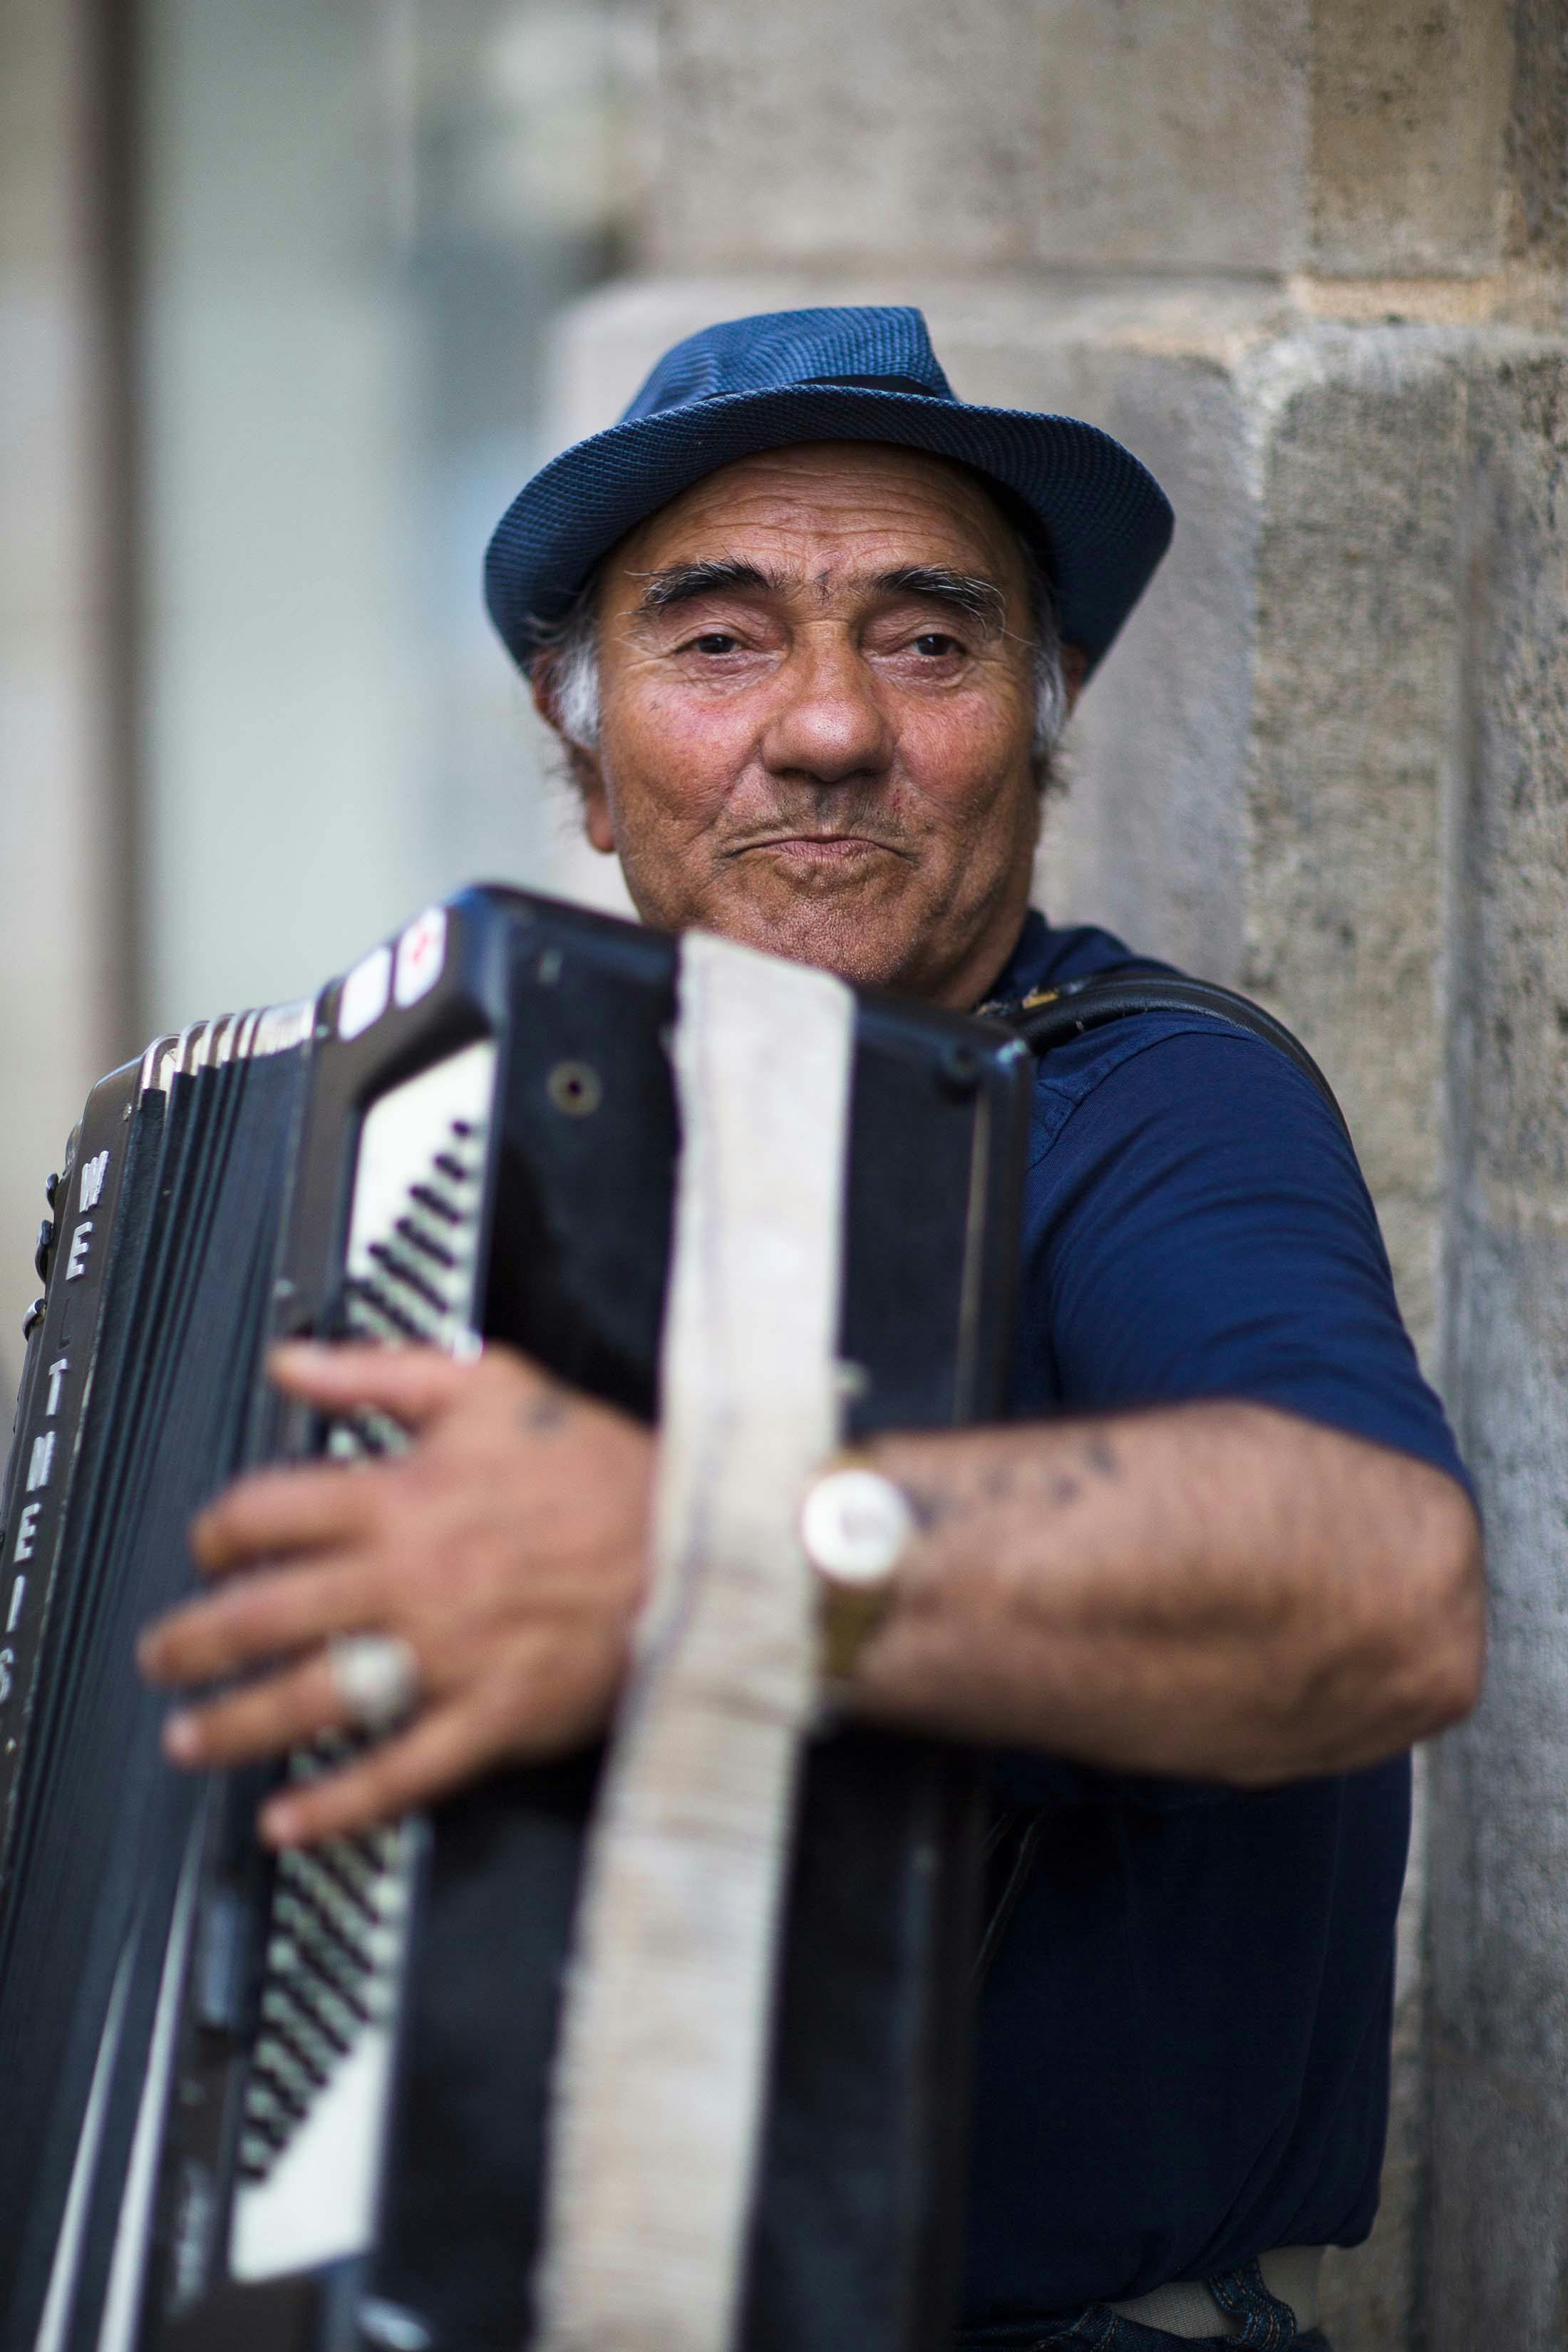 Accordion musician in Bordeaux, France